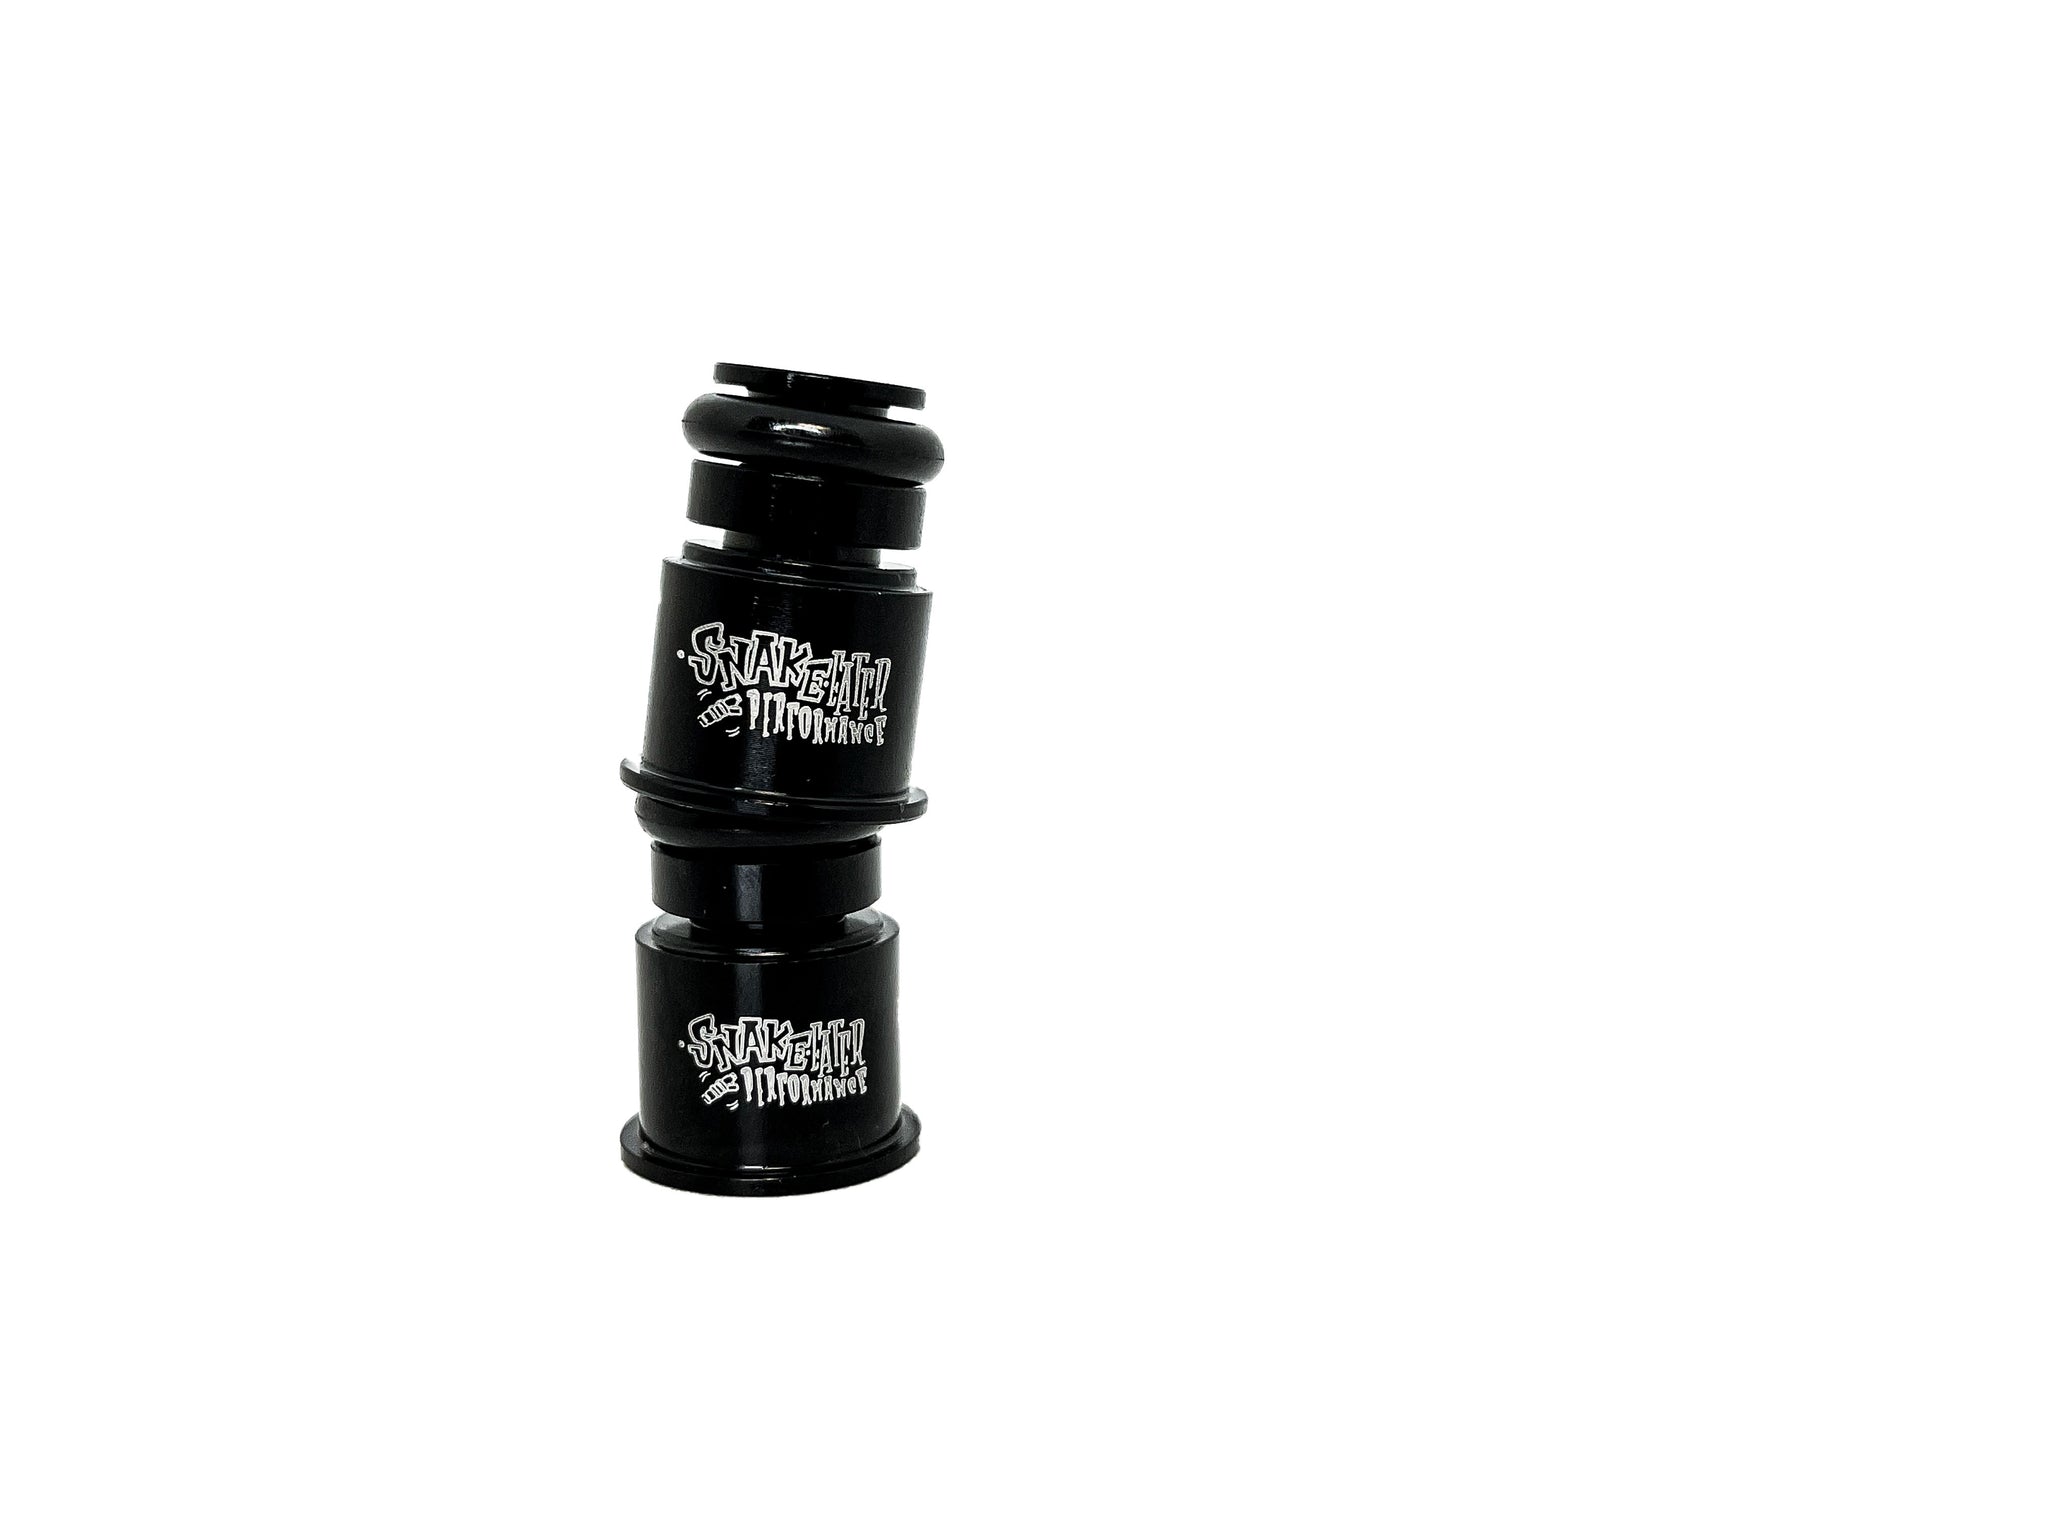 SEP Fuel Injector Top Hat Adapter - LS2 to LS1 (14mm or 11mm)